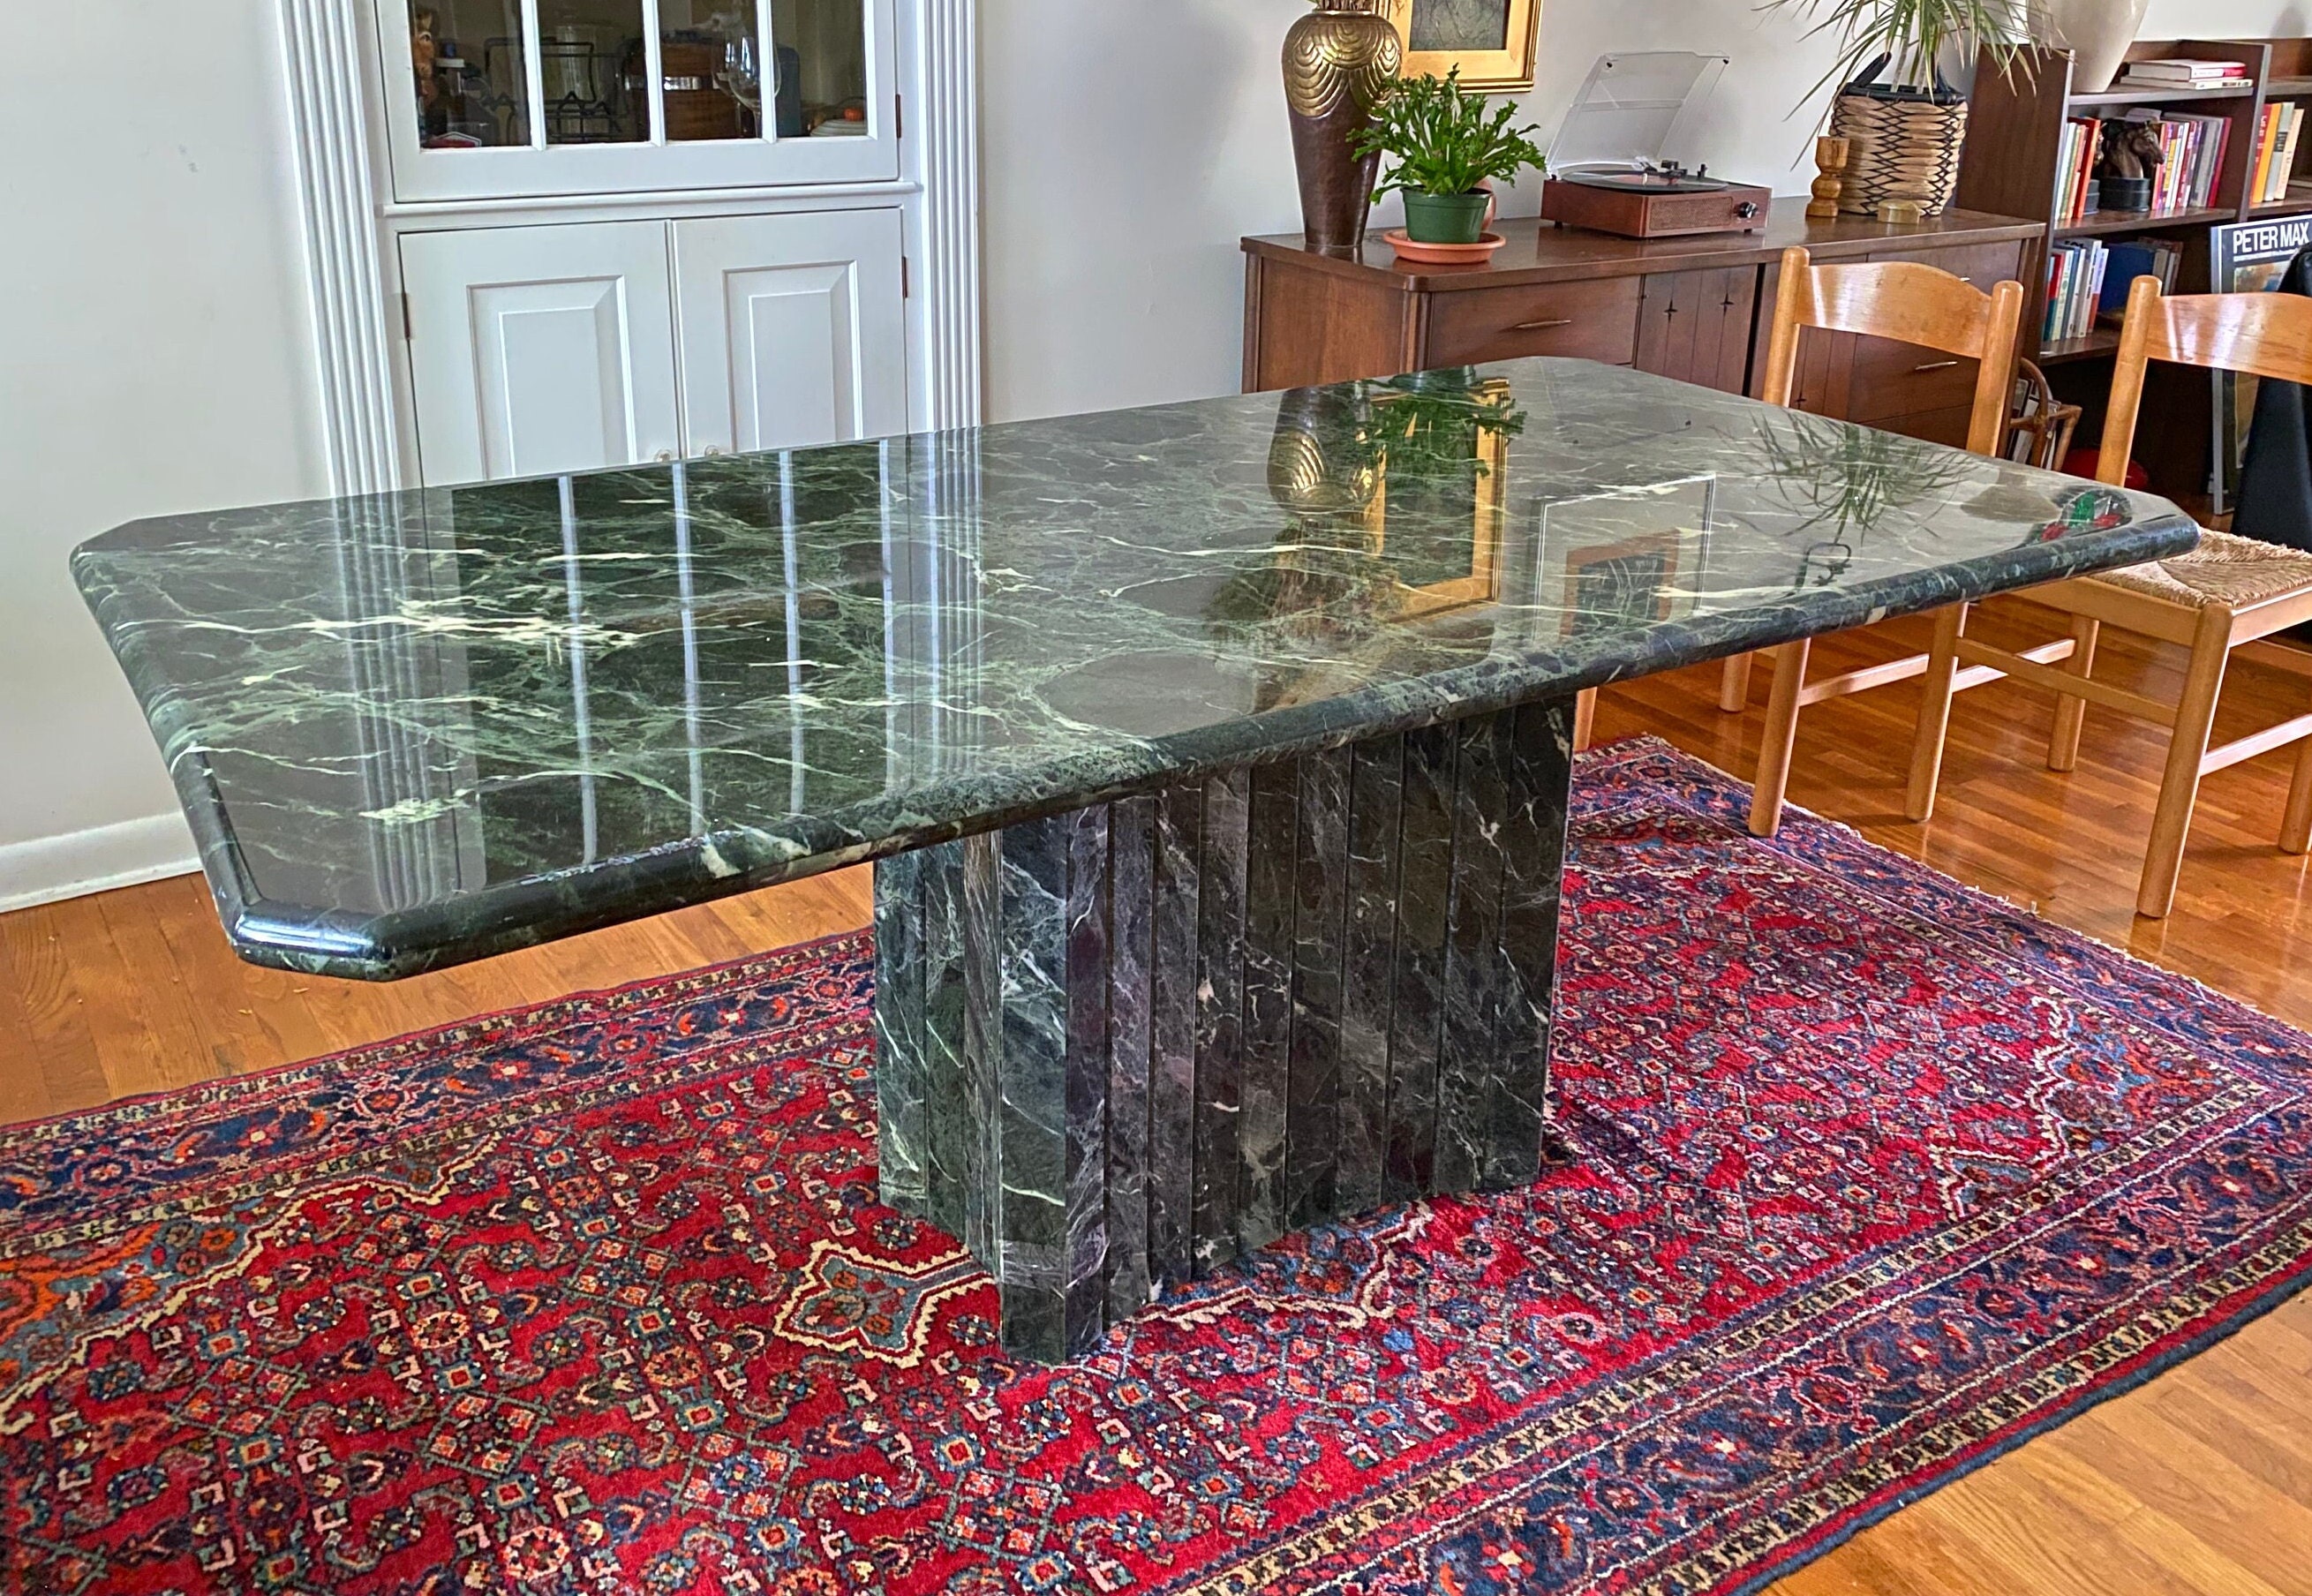 Design Dining Table, Heavy Duty Sturdy Steel Legs With Granite Top 